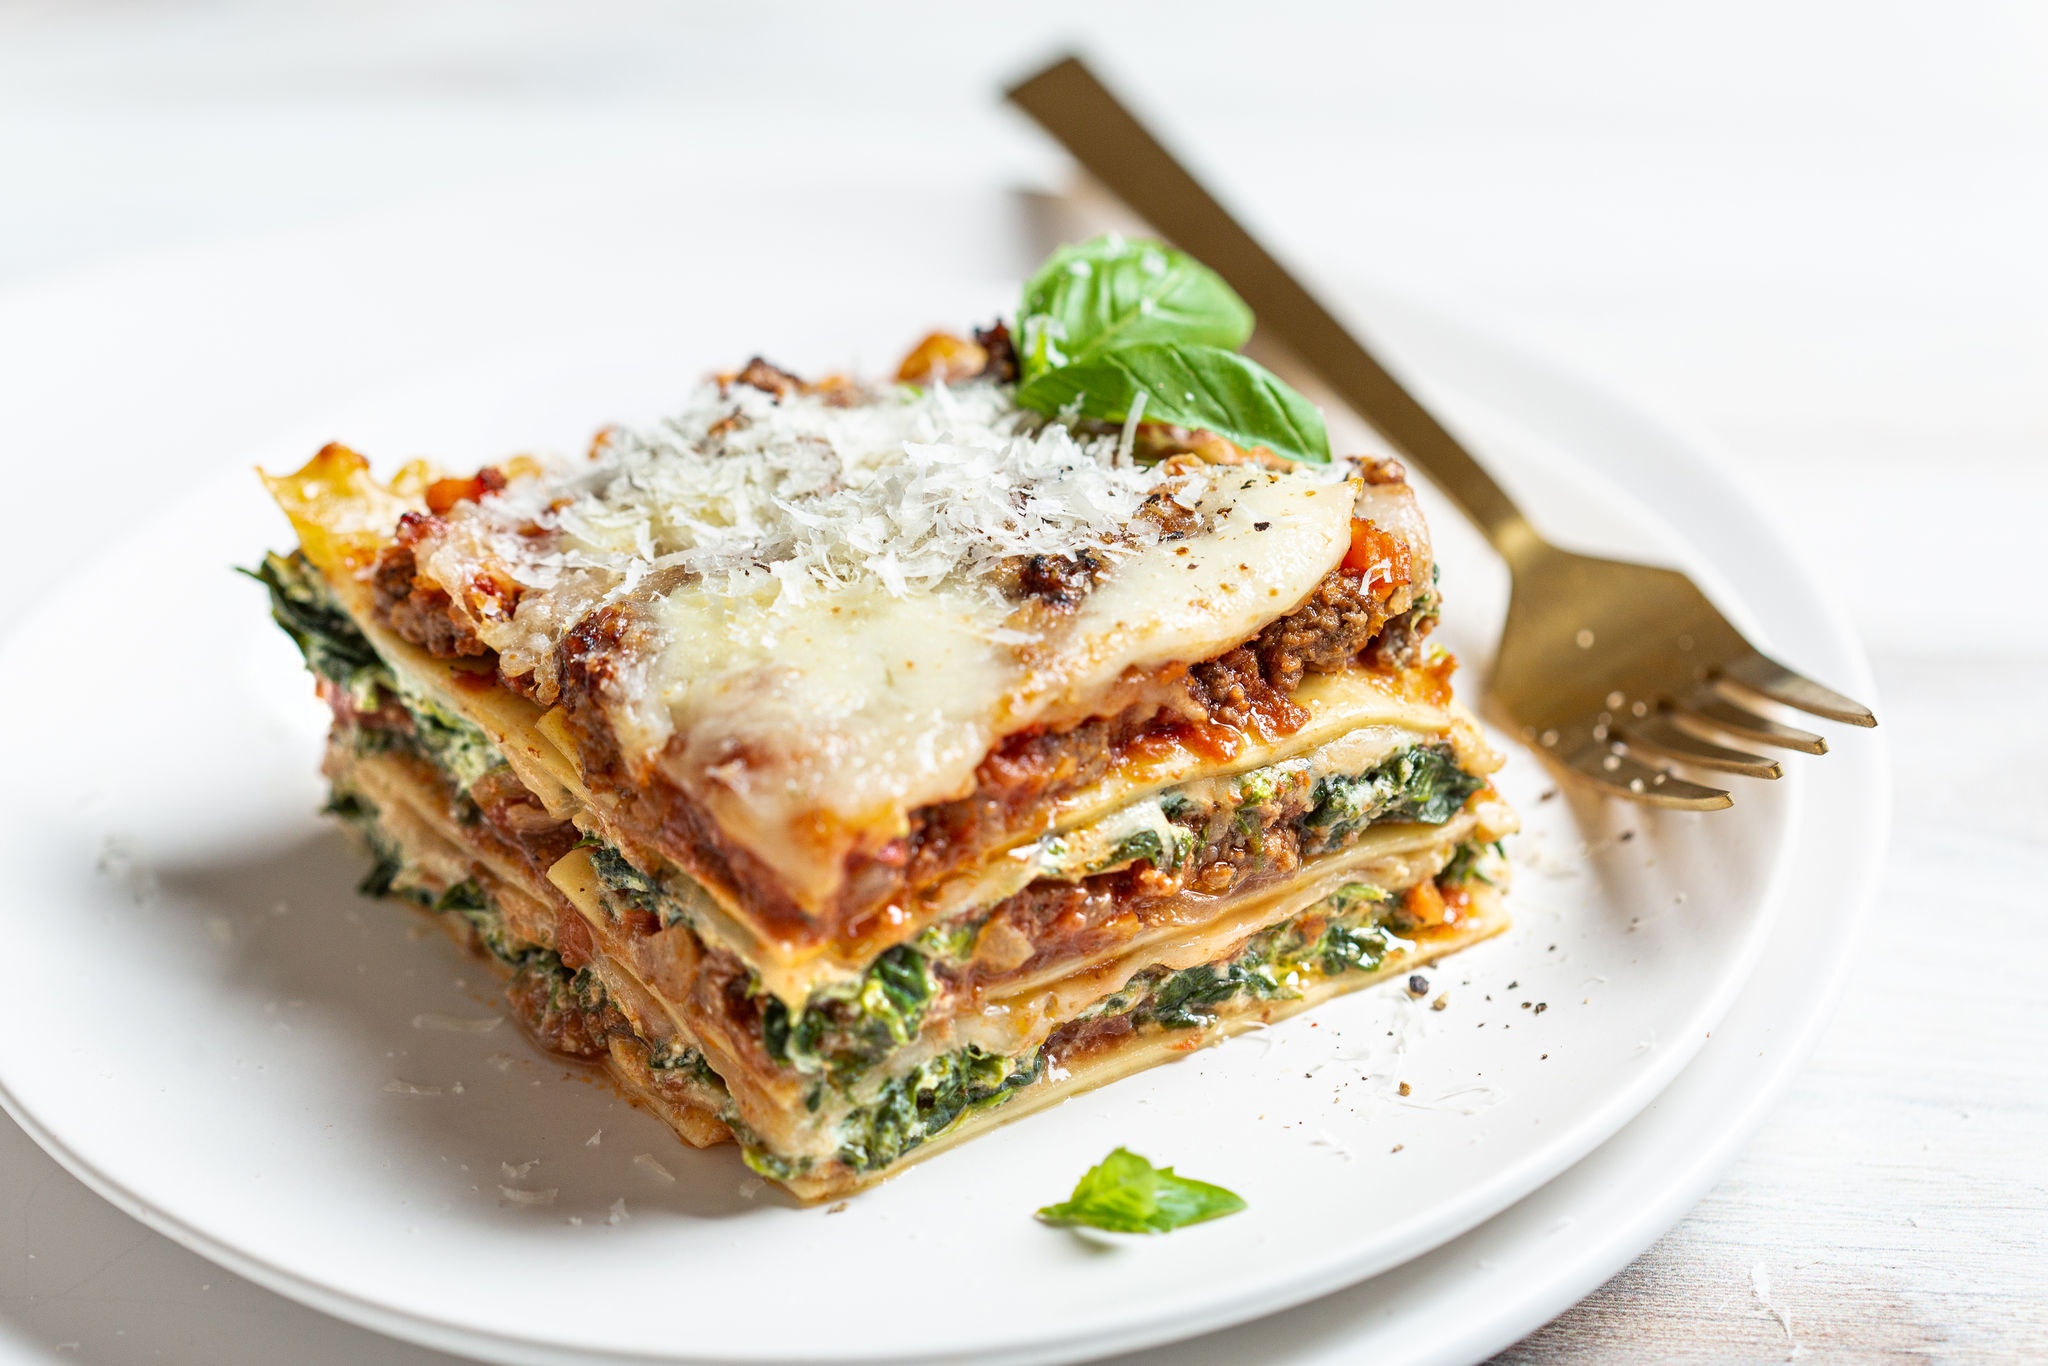 Beef Brisket Lasagna with Spinach and Ricotta